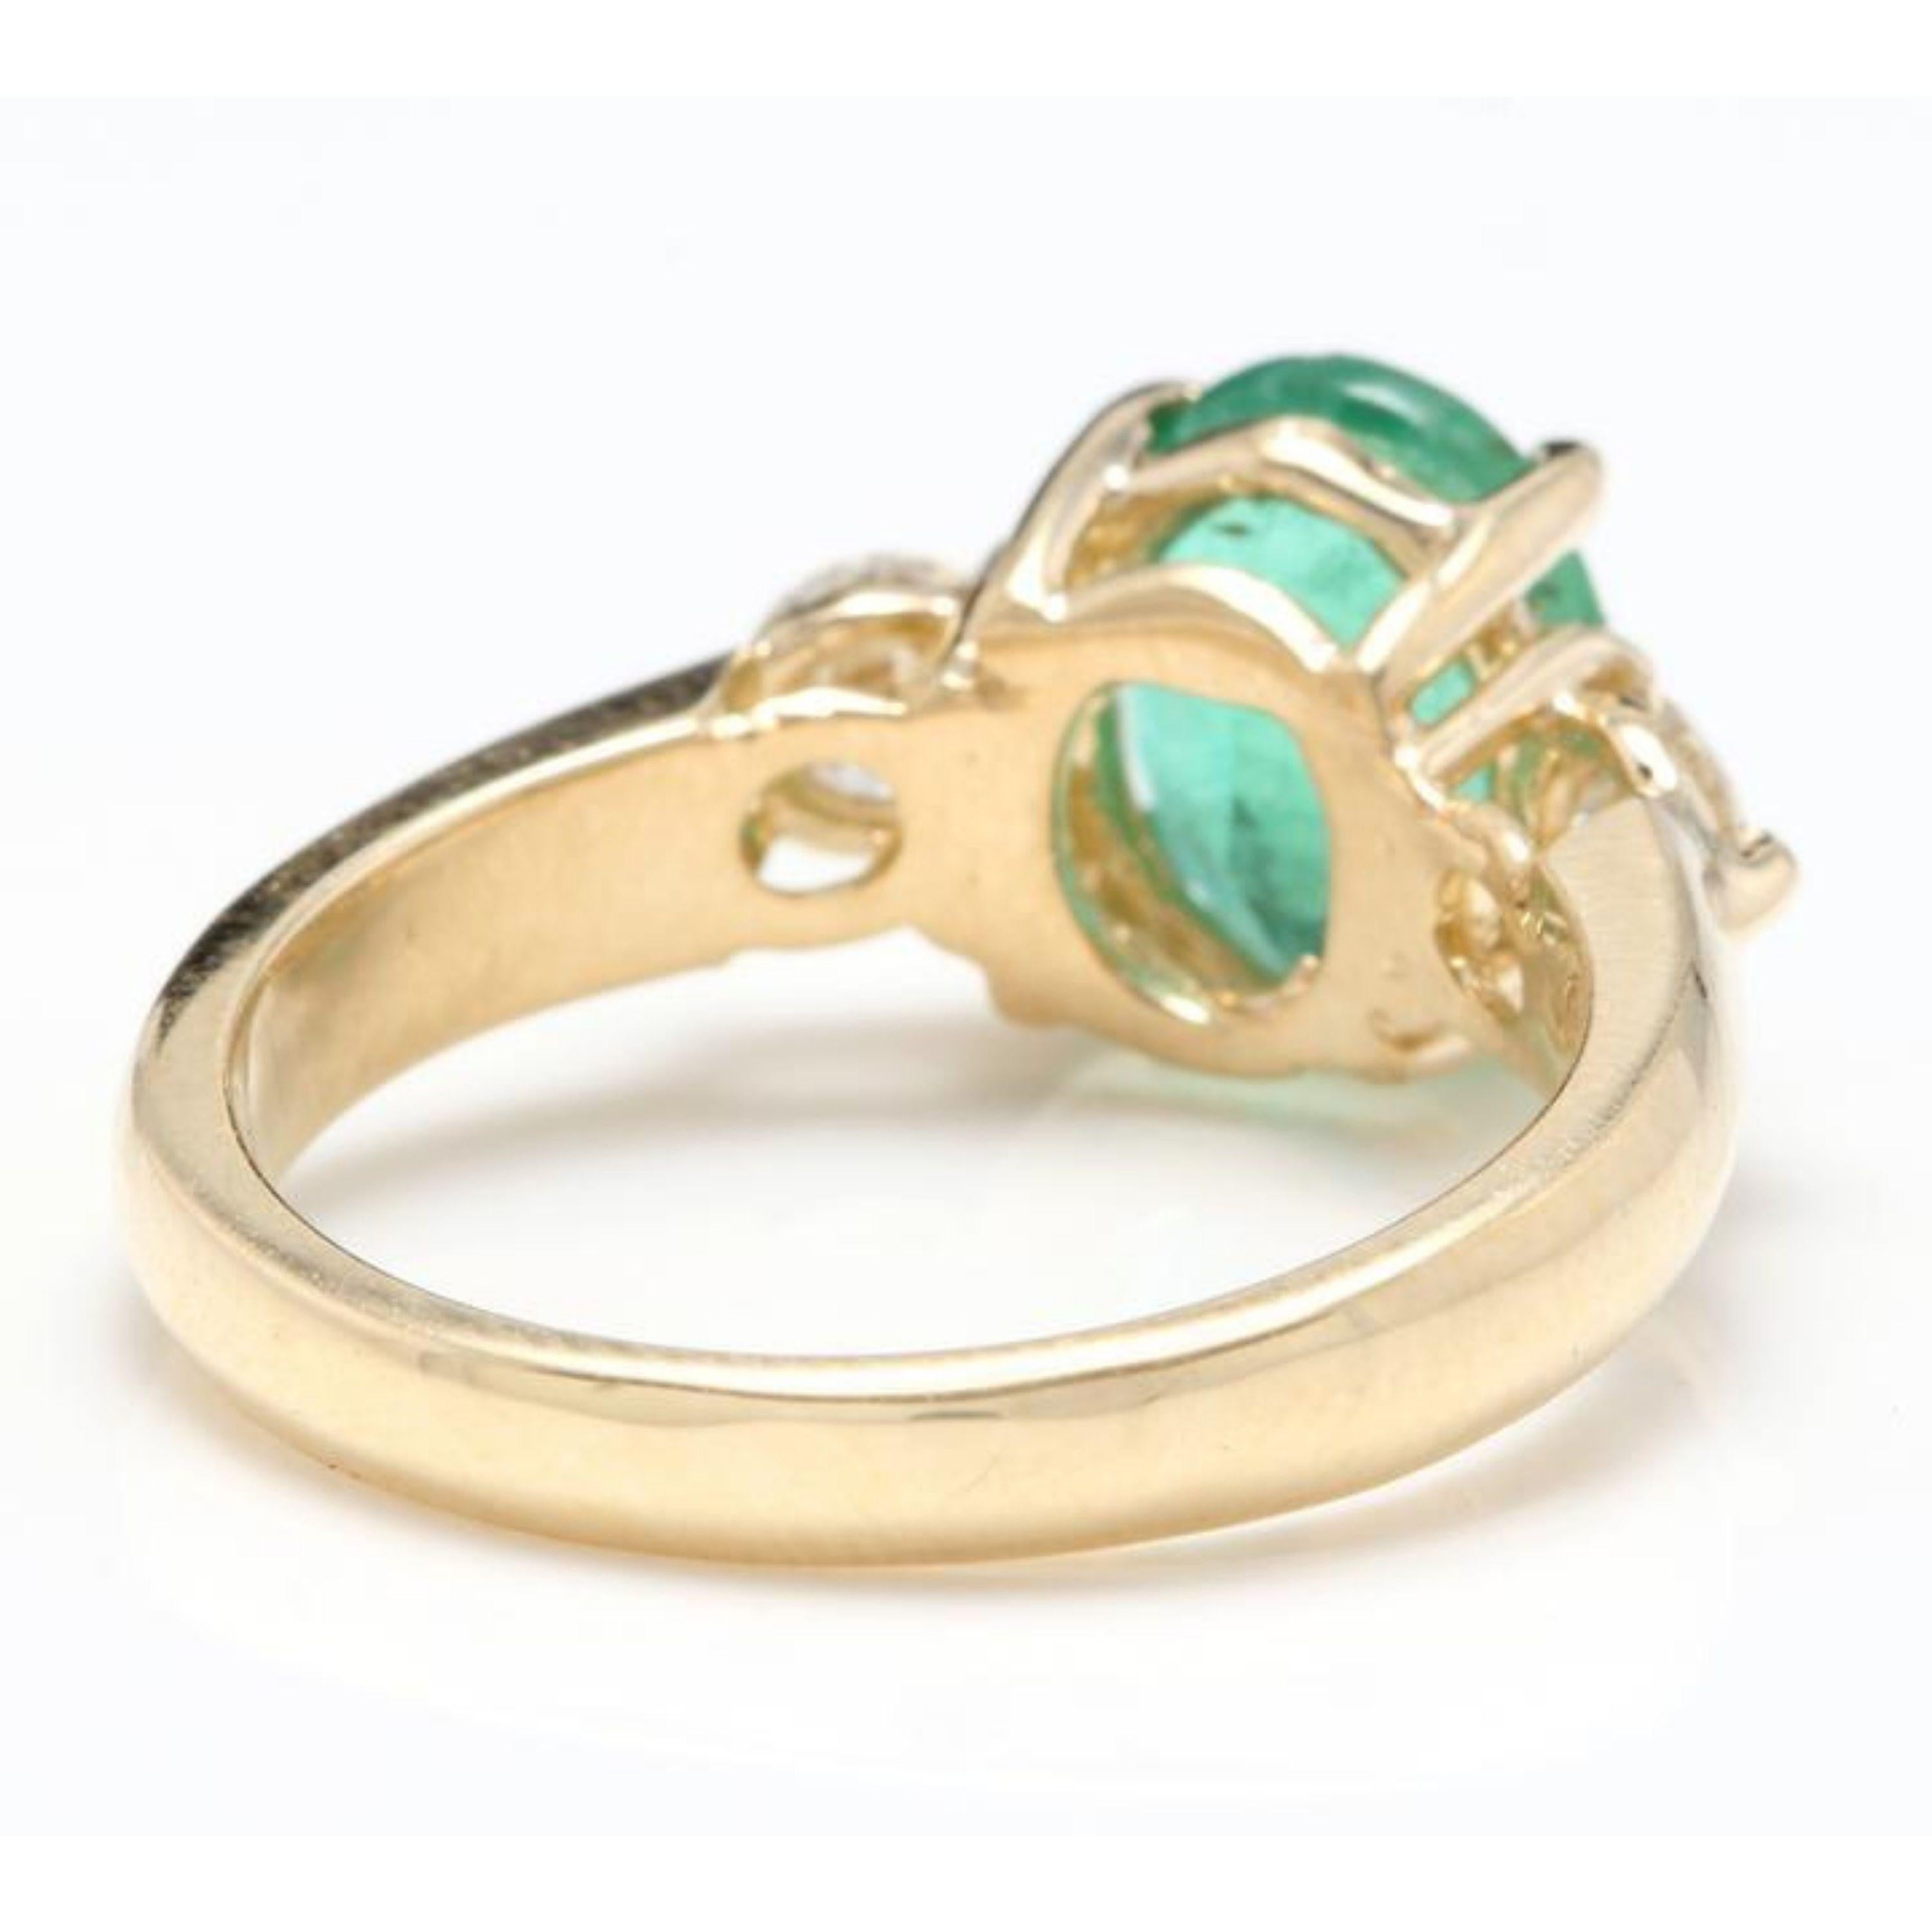 2.16 Carat Natural Emerald and Diamond 14 Karat Solid Yellow Gold Ring In New Condition For Sale In Los Angeles, CA